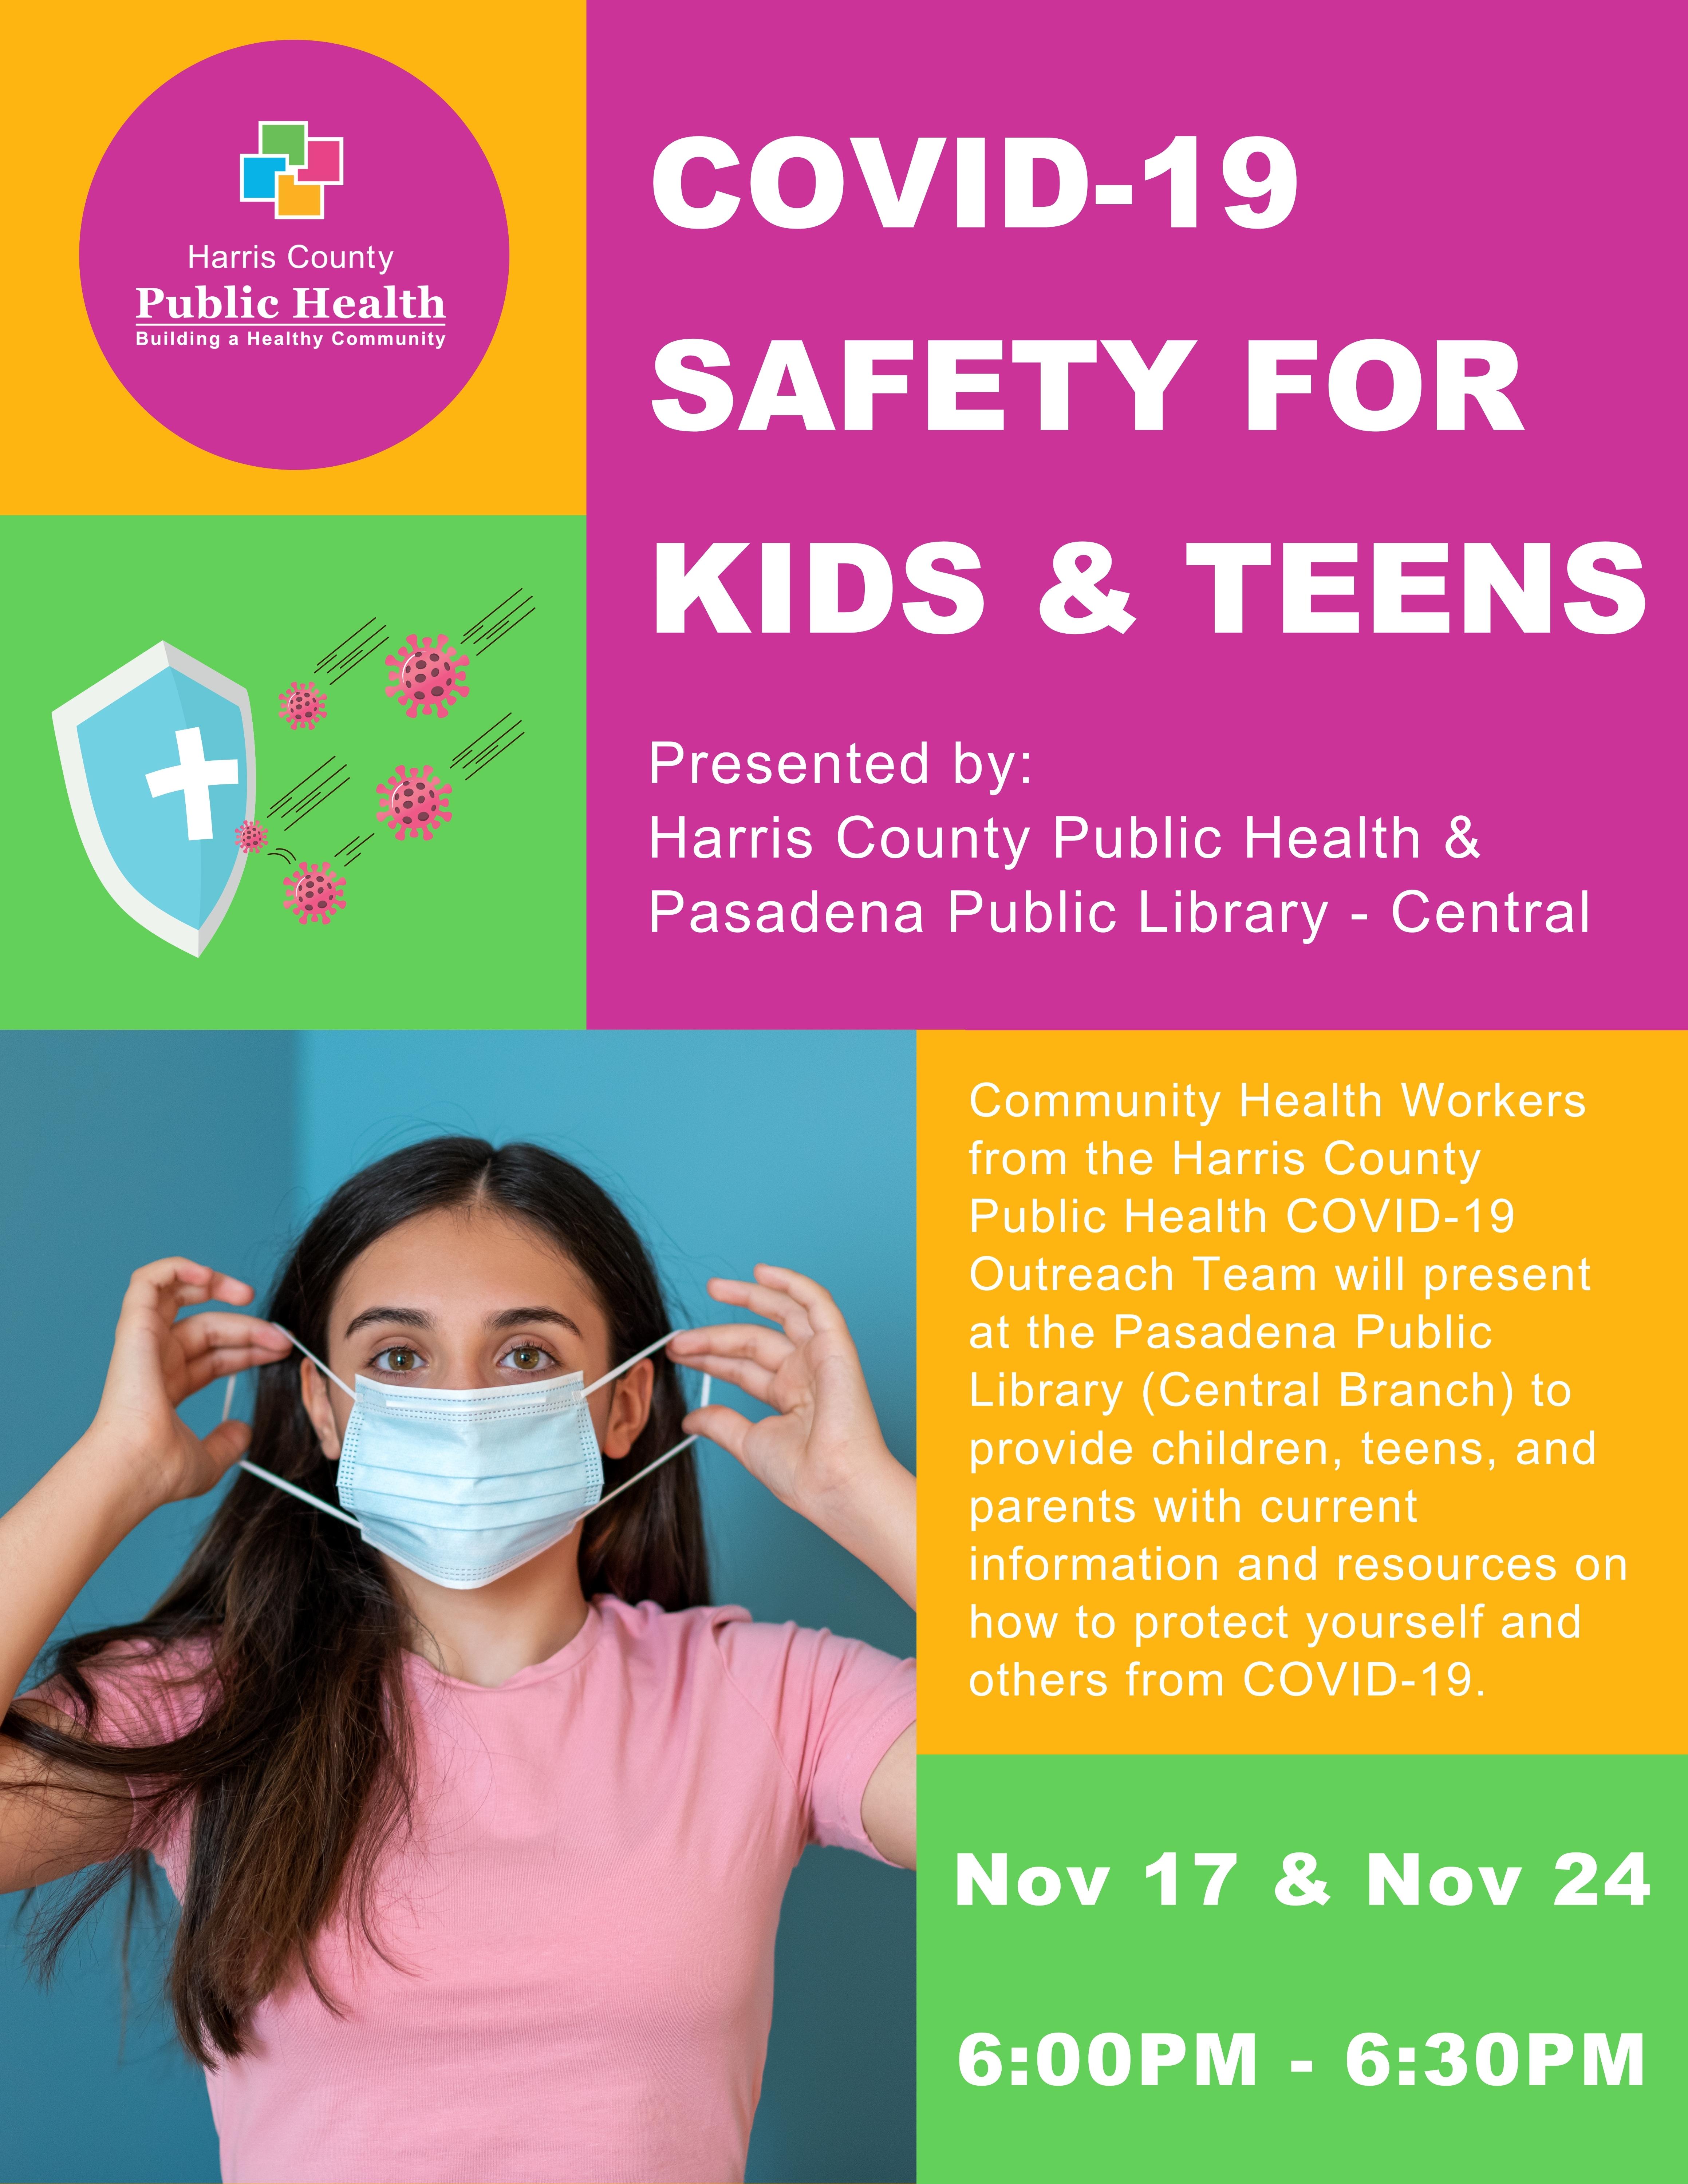 COVID-19 Safety For Kids & Teens